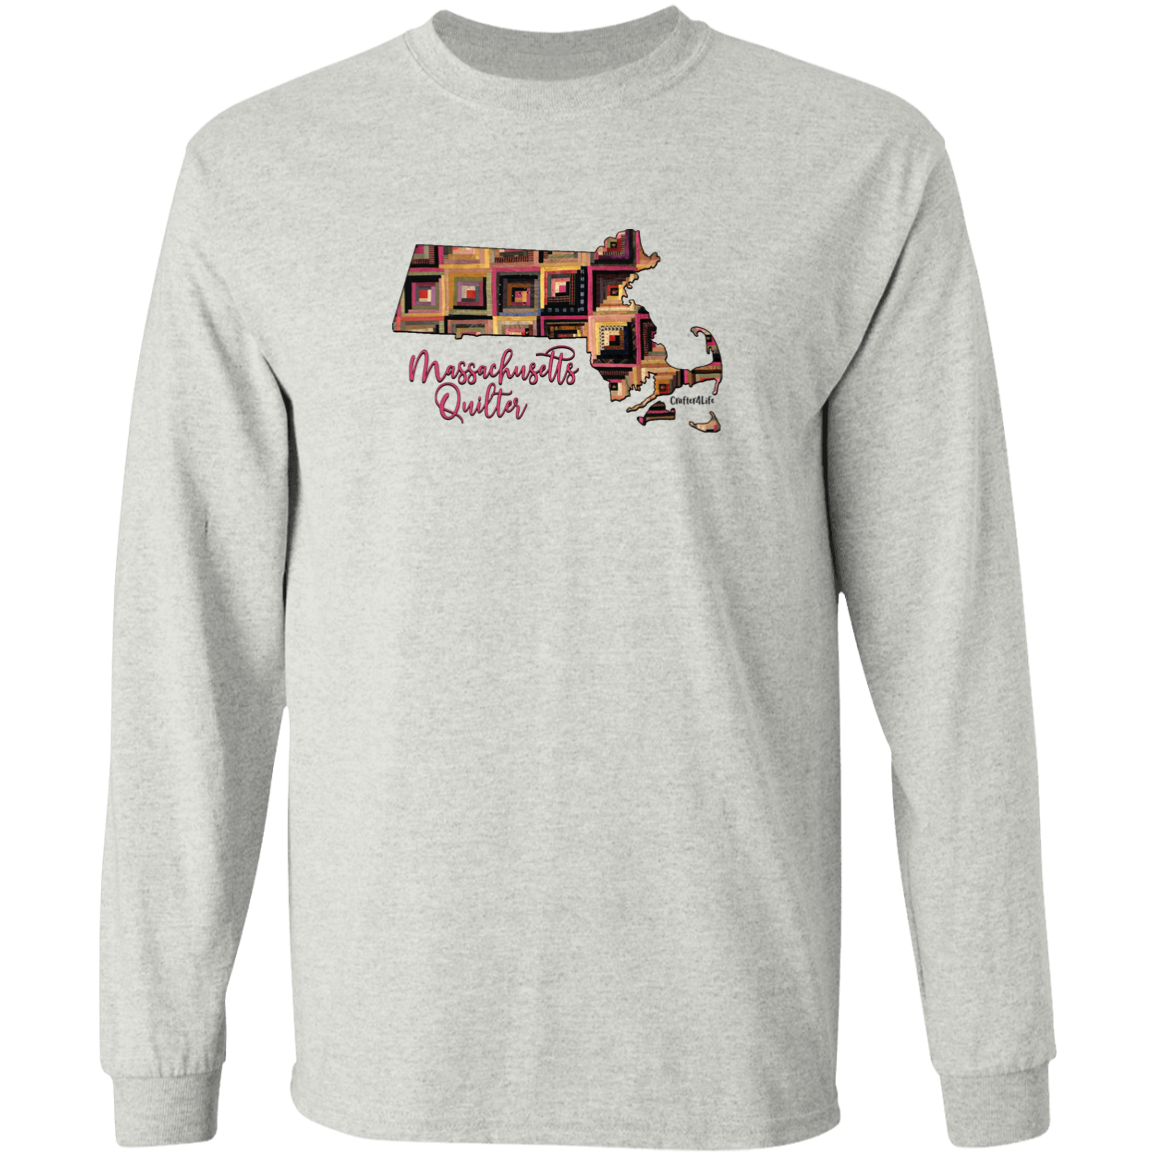 Massachusetts Quilter Long Sleeve T-Shirt, Gift for Quilting Friends and Family